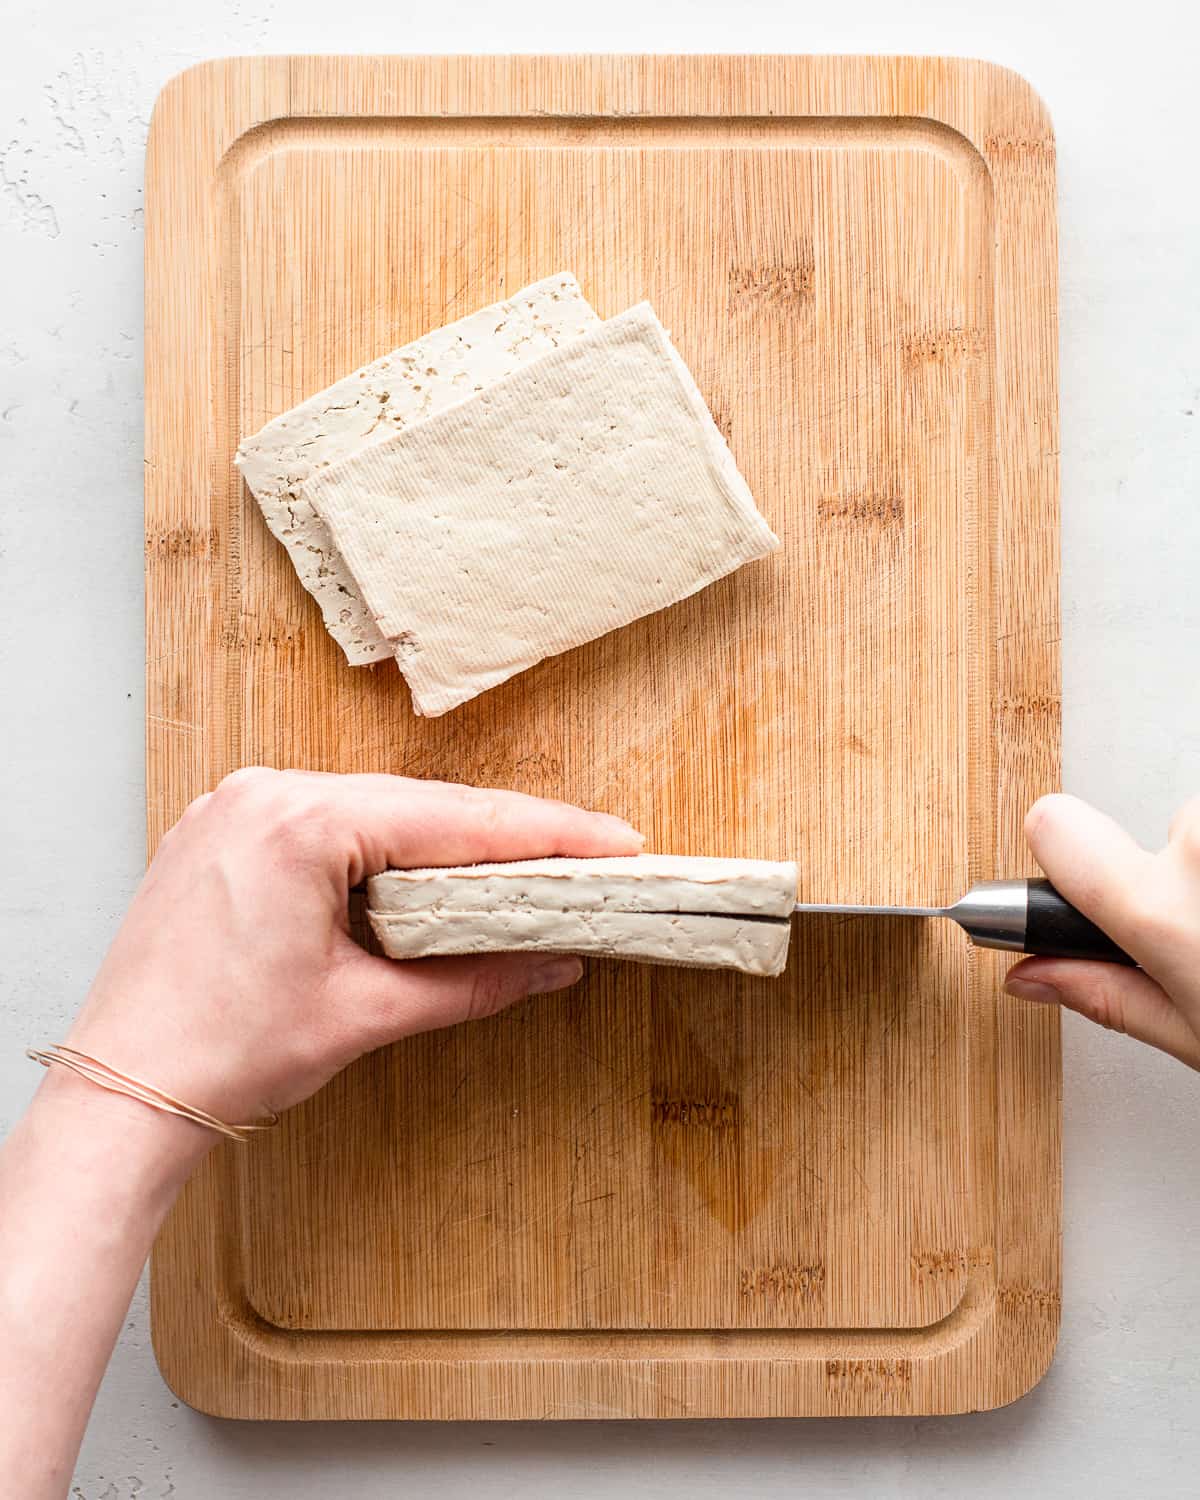 Hand cutting a block on tofu lengthwise in half.